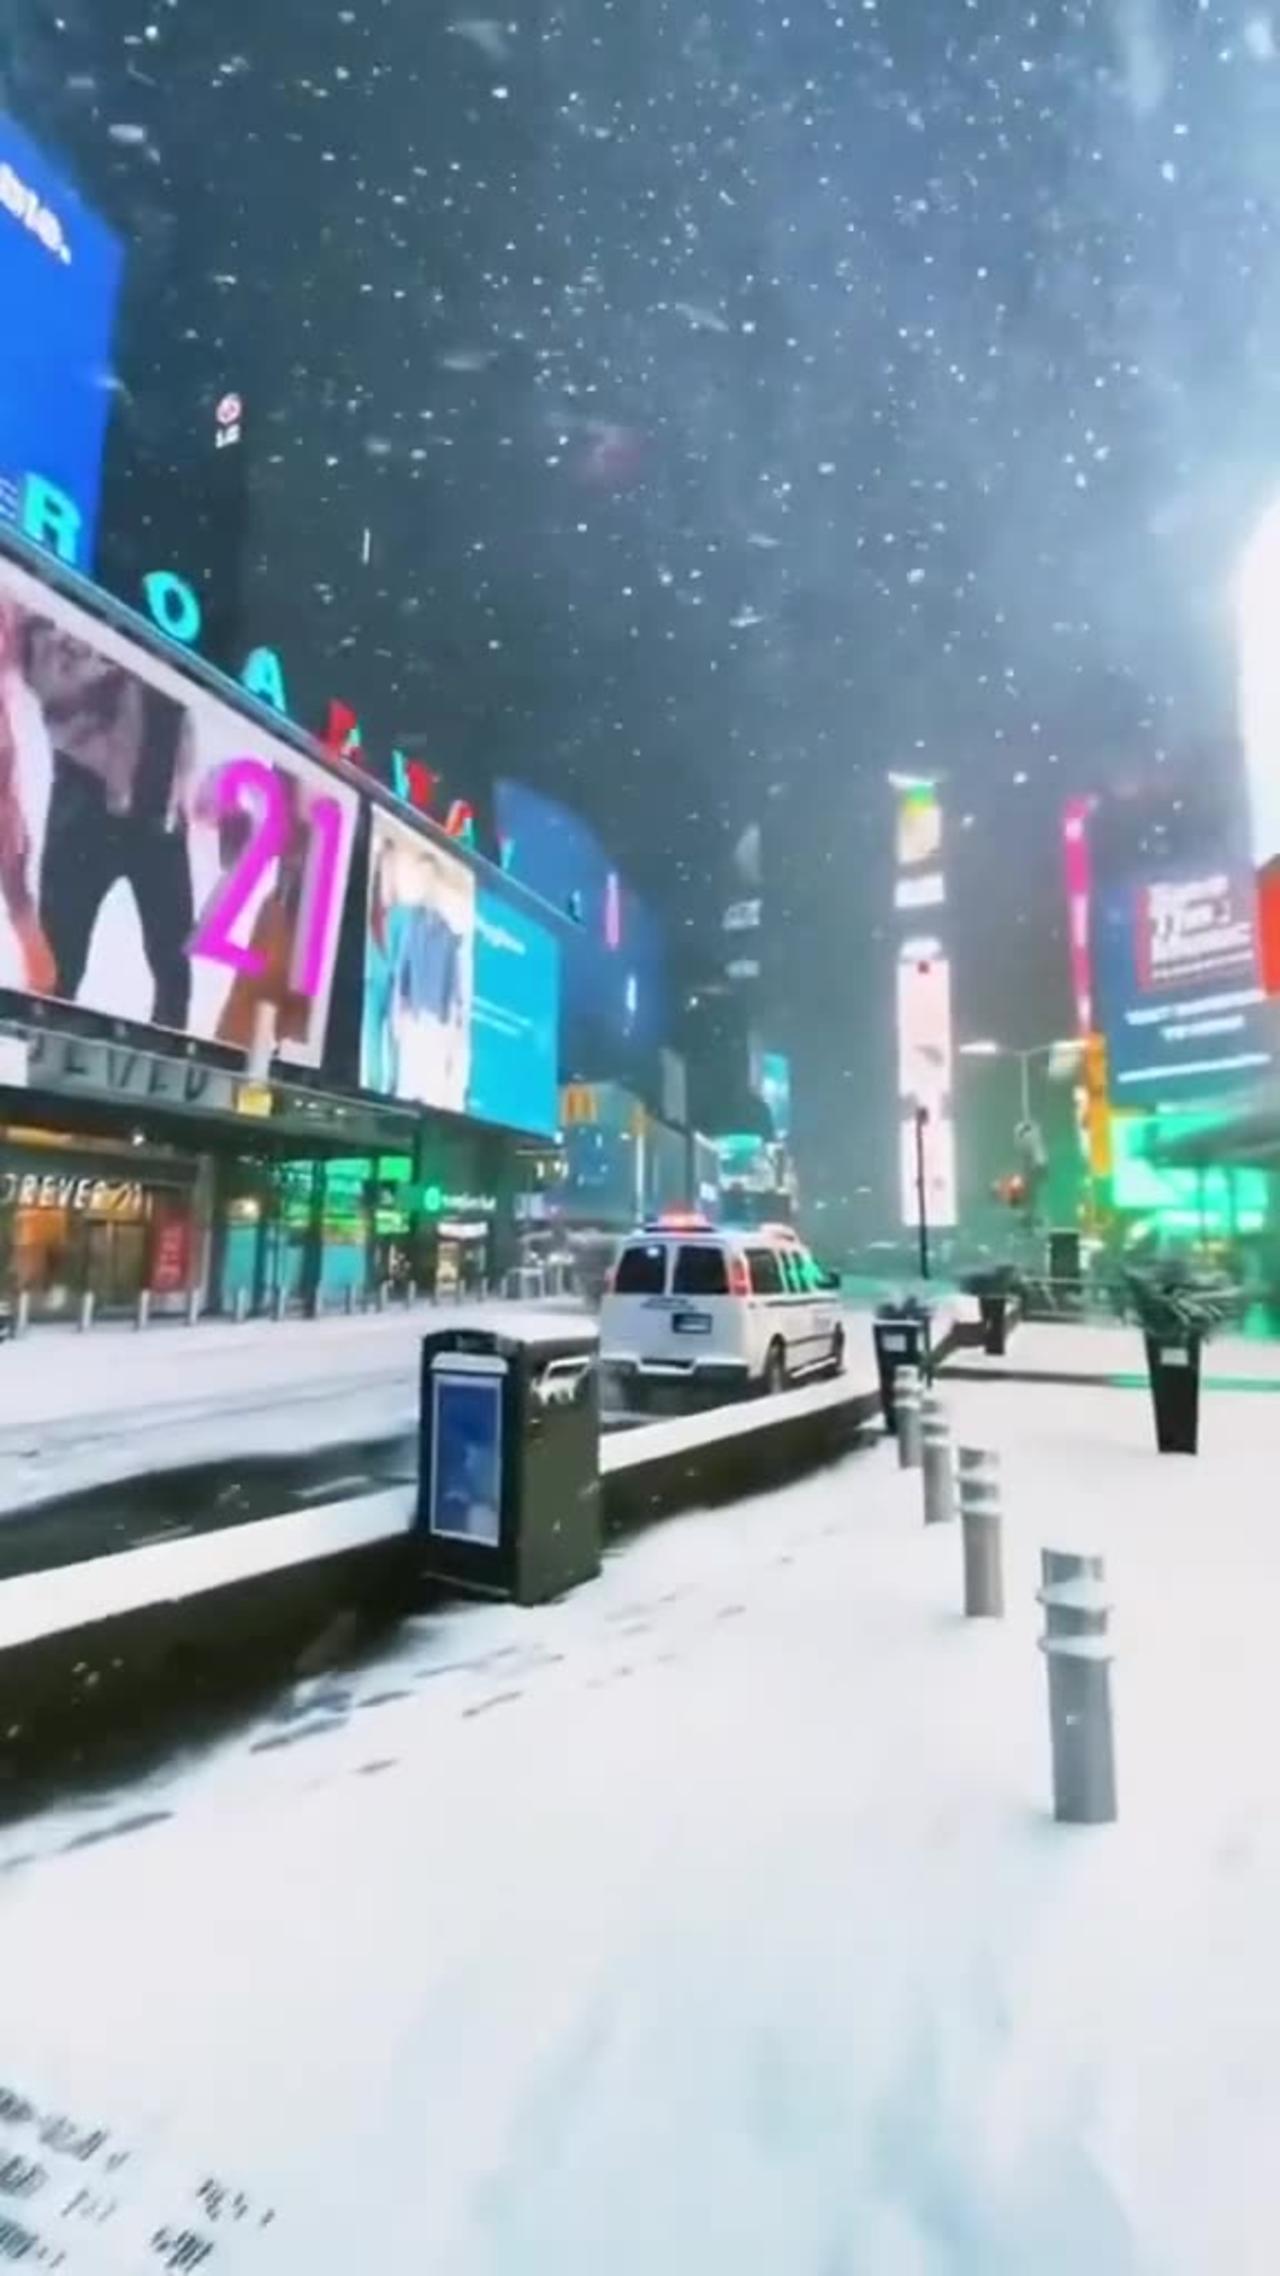 Snowfall in Times Square New York.